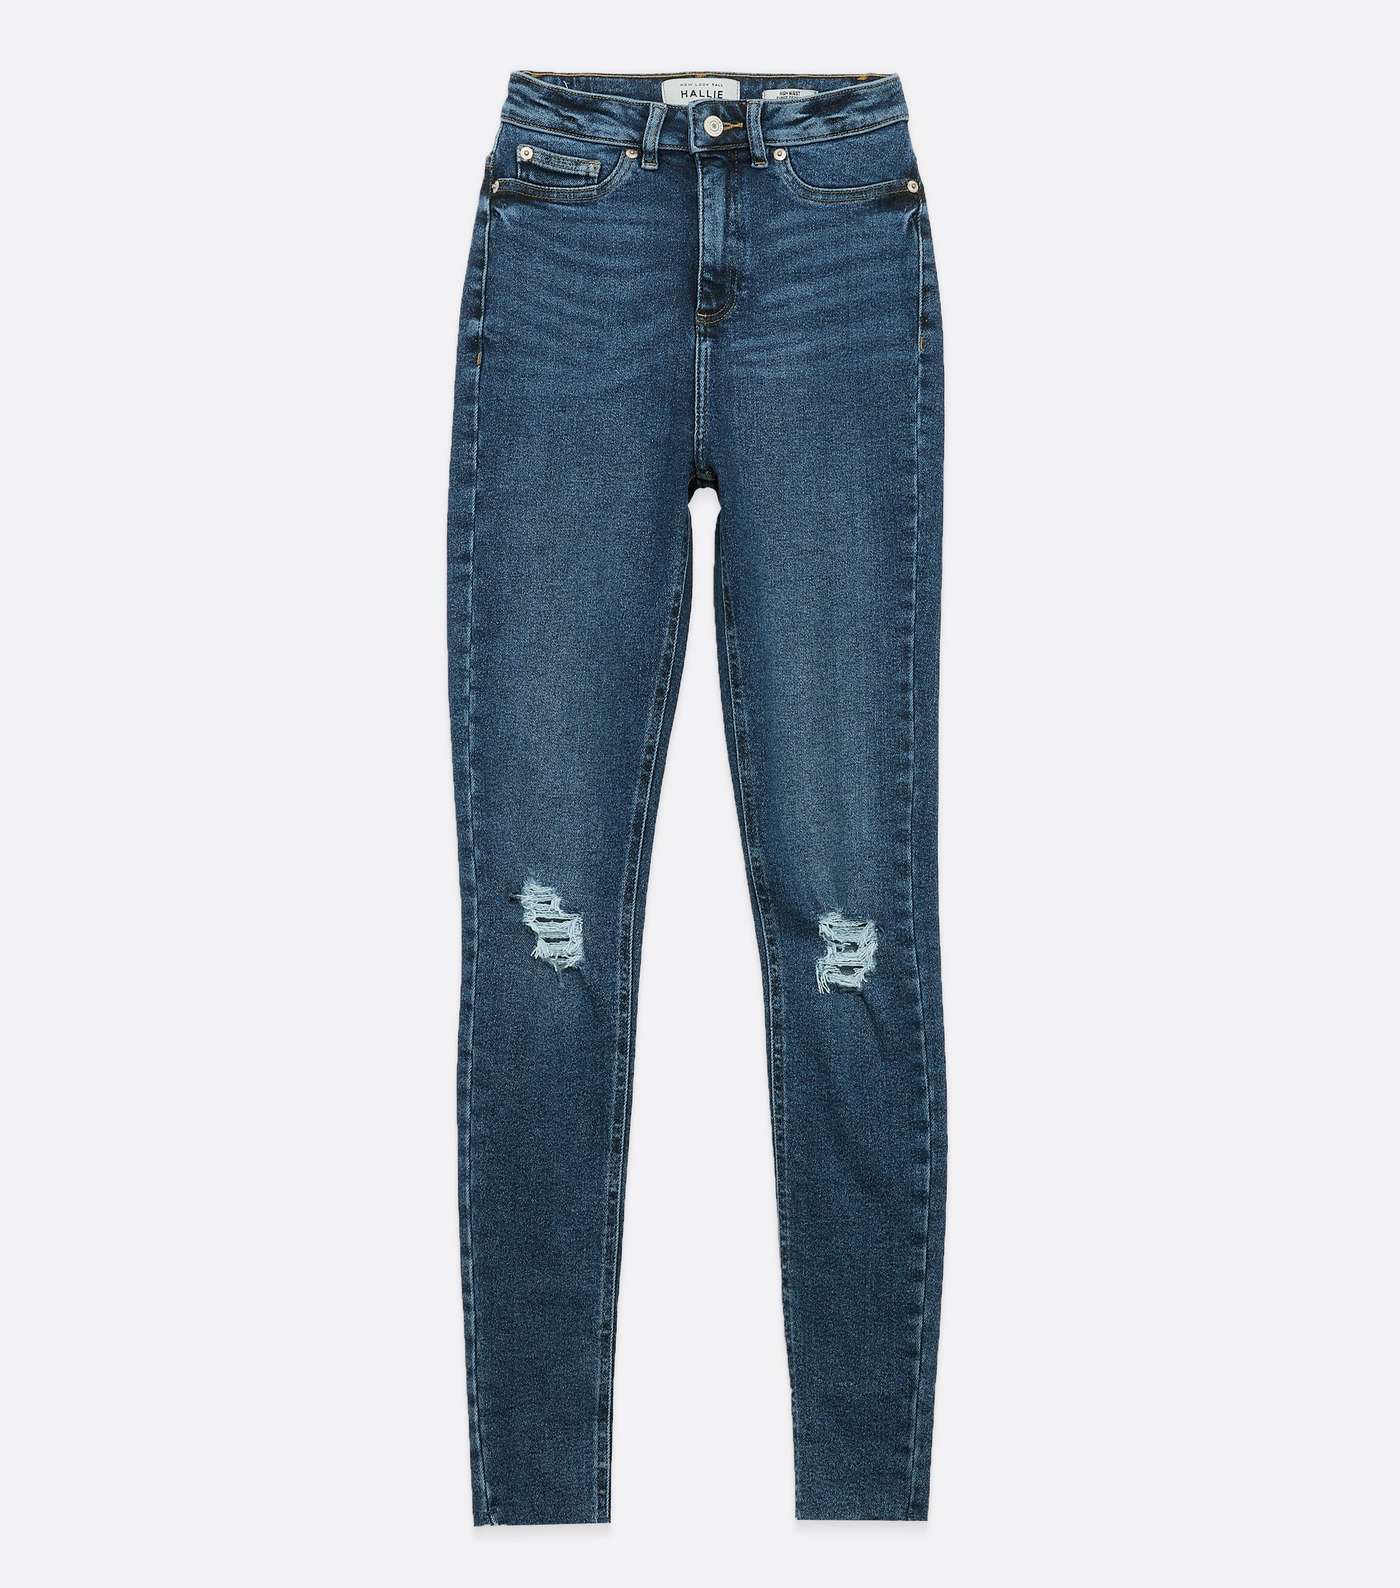 Tall Blue Rinse Wash Ripped High Waist Hallie Super Skinny Jeans Image 5